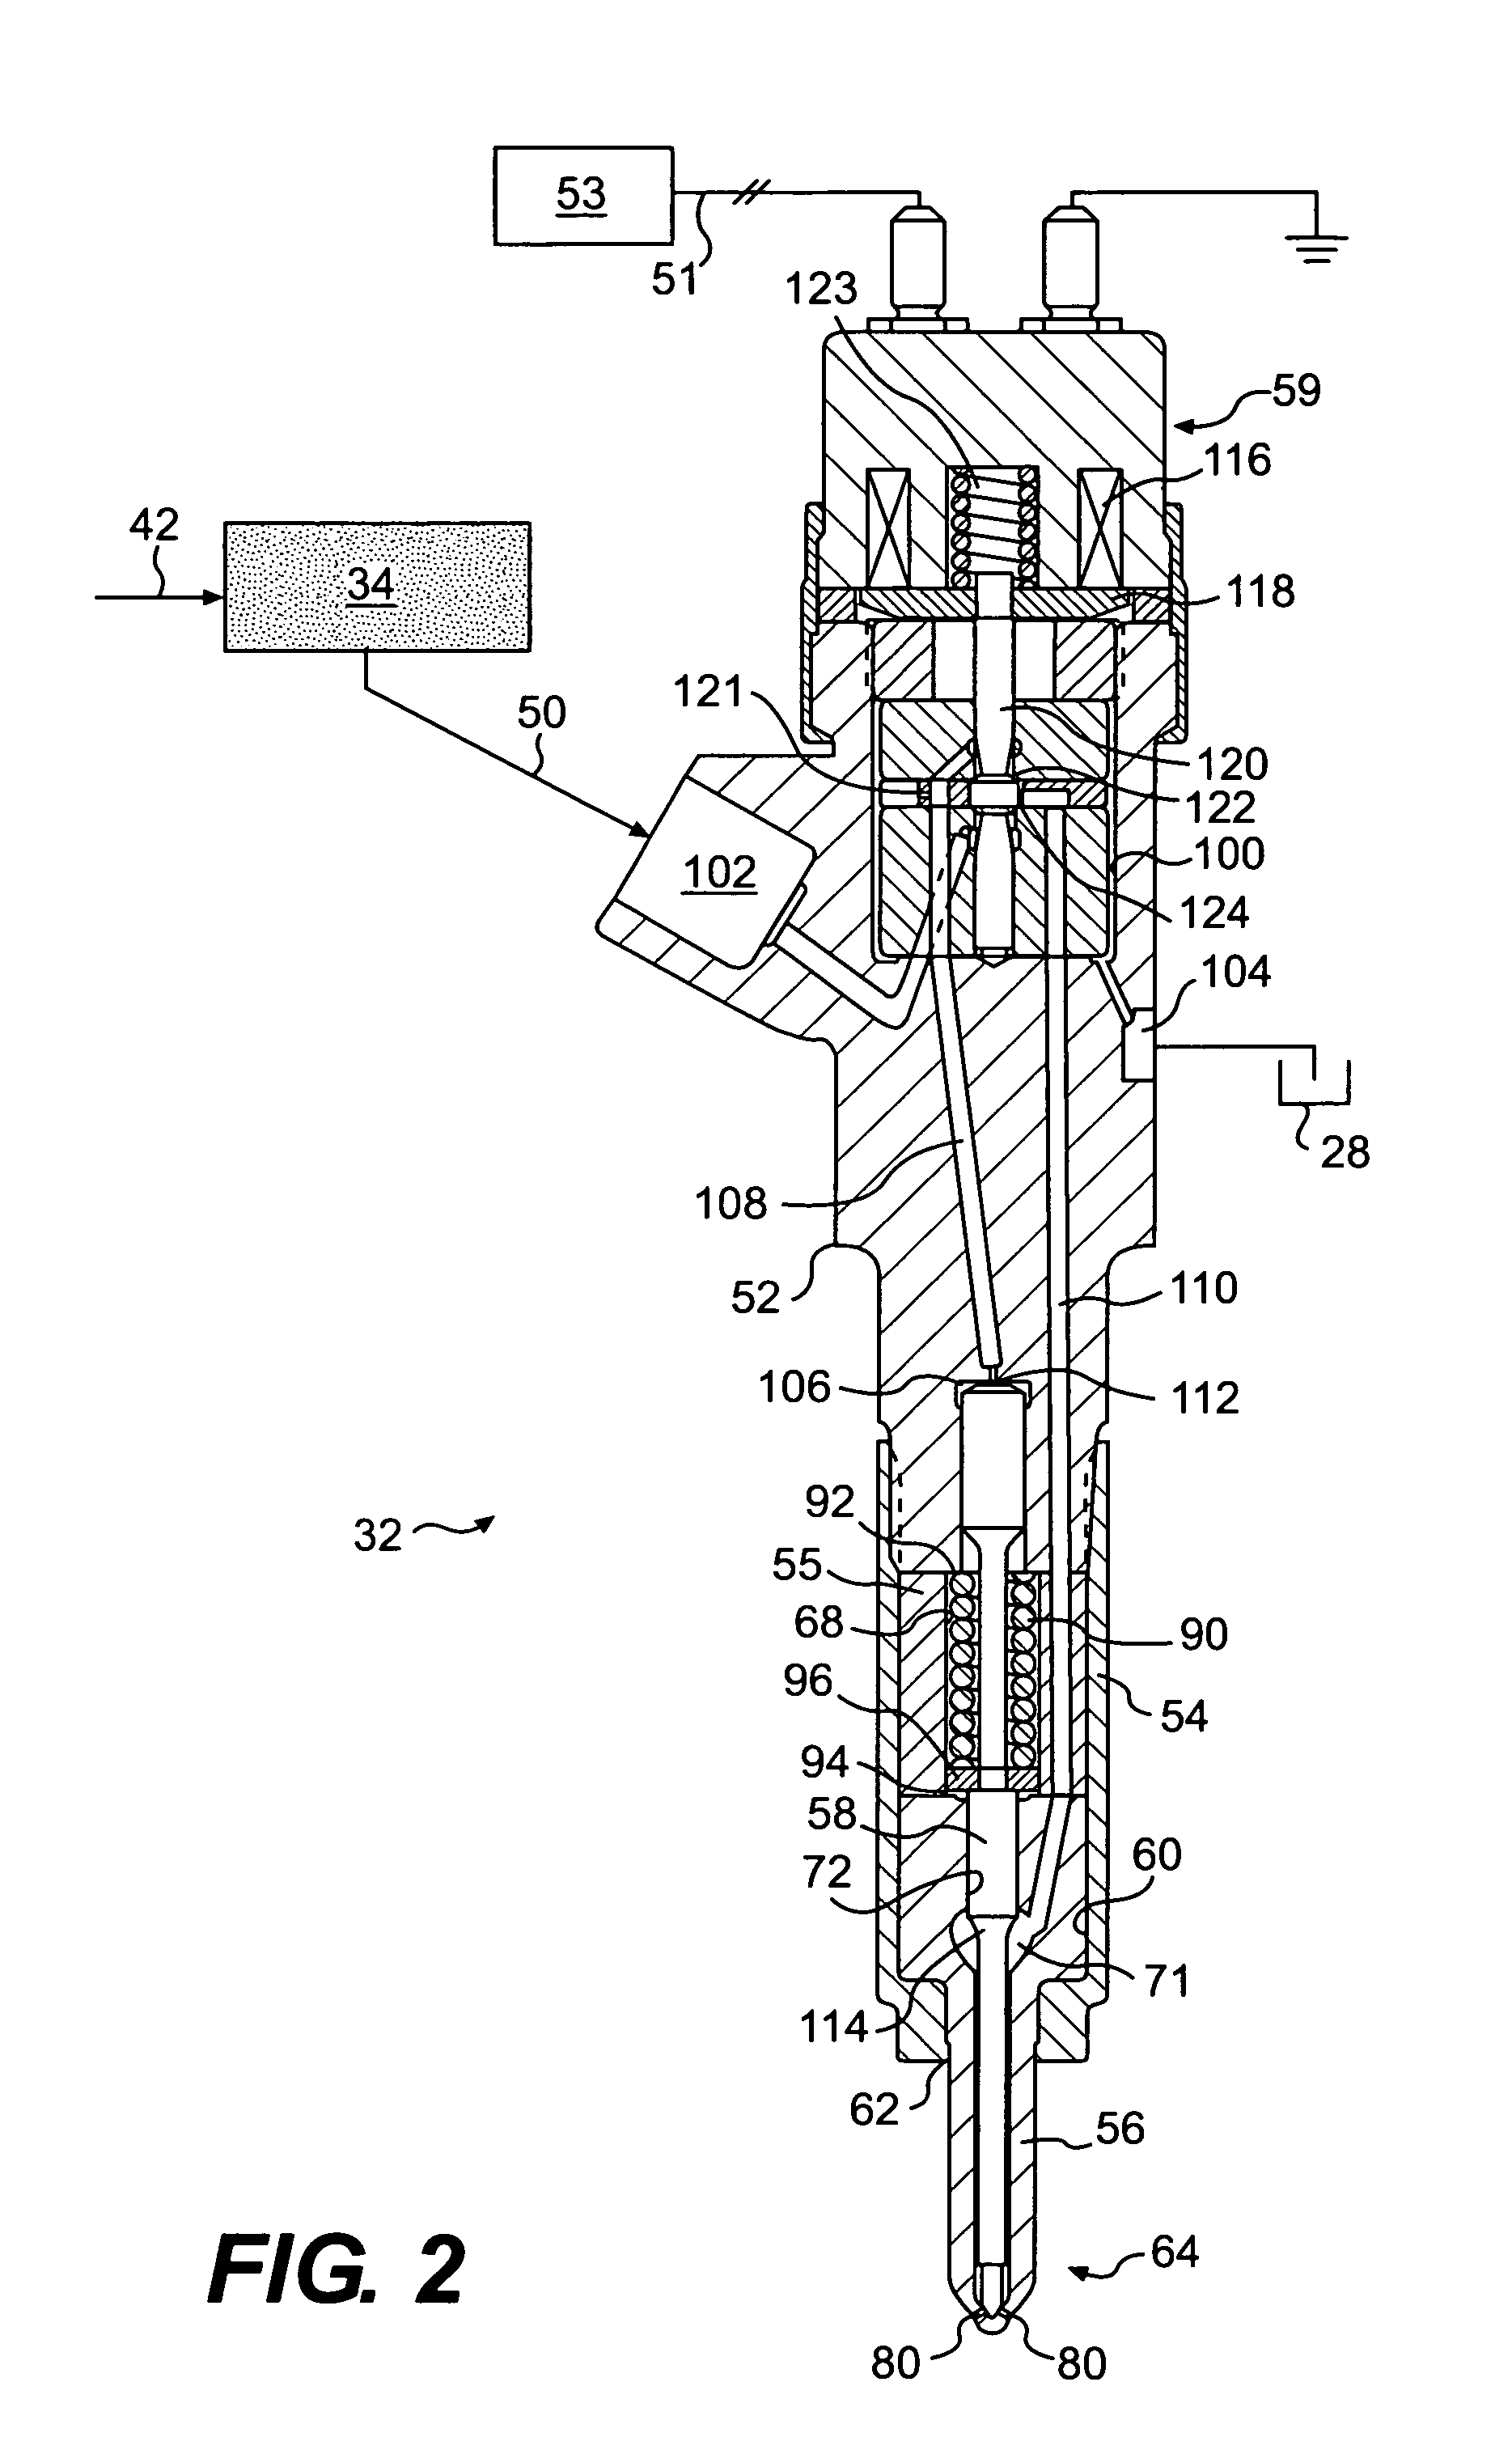 Fuel injector control system